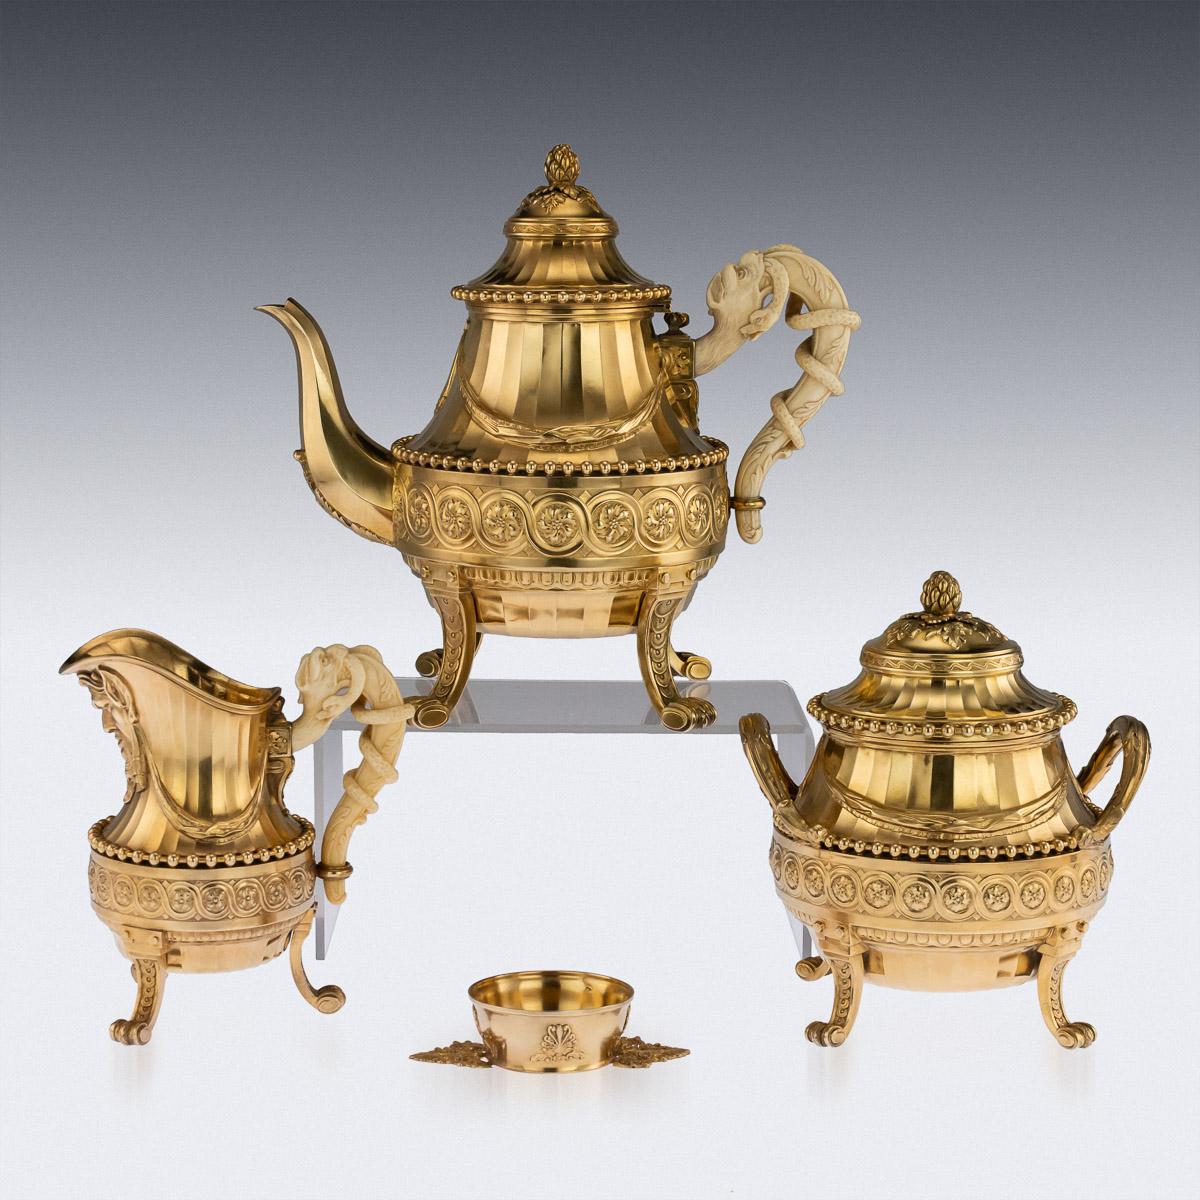 Antique 19th century exceptional French Louis XVI style solid silver-gilt tea service on tray, comprising of a teapot, covered sugar bowl, cream jug, twelve tea cups and a tea stariner, all richly gilt throughout. Tea set standing on cast scroll